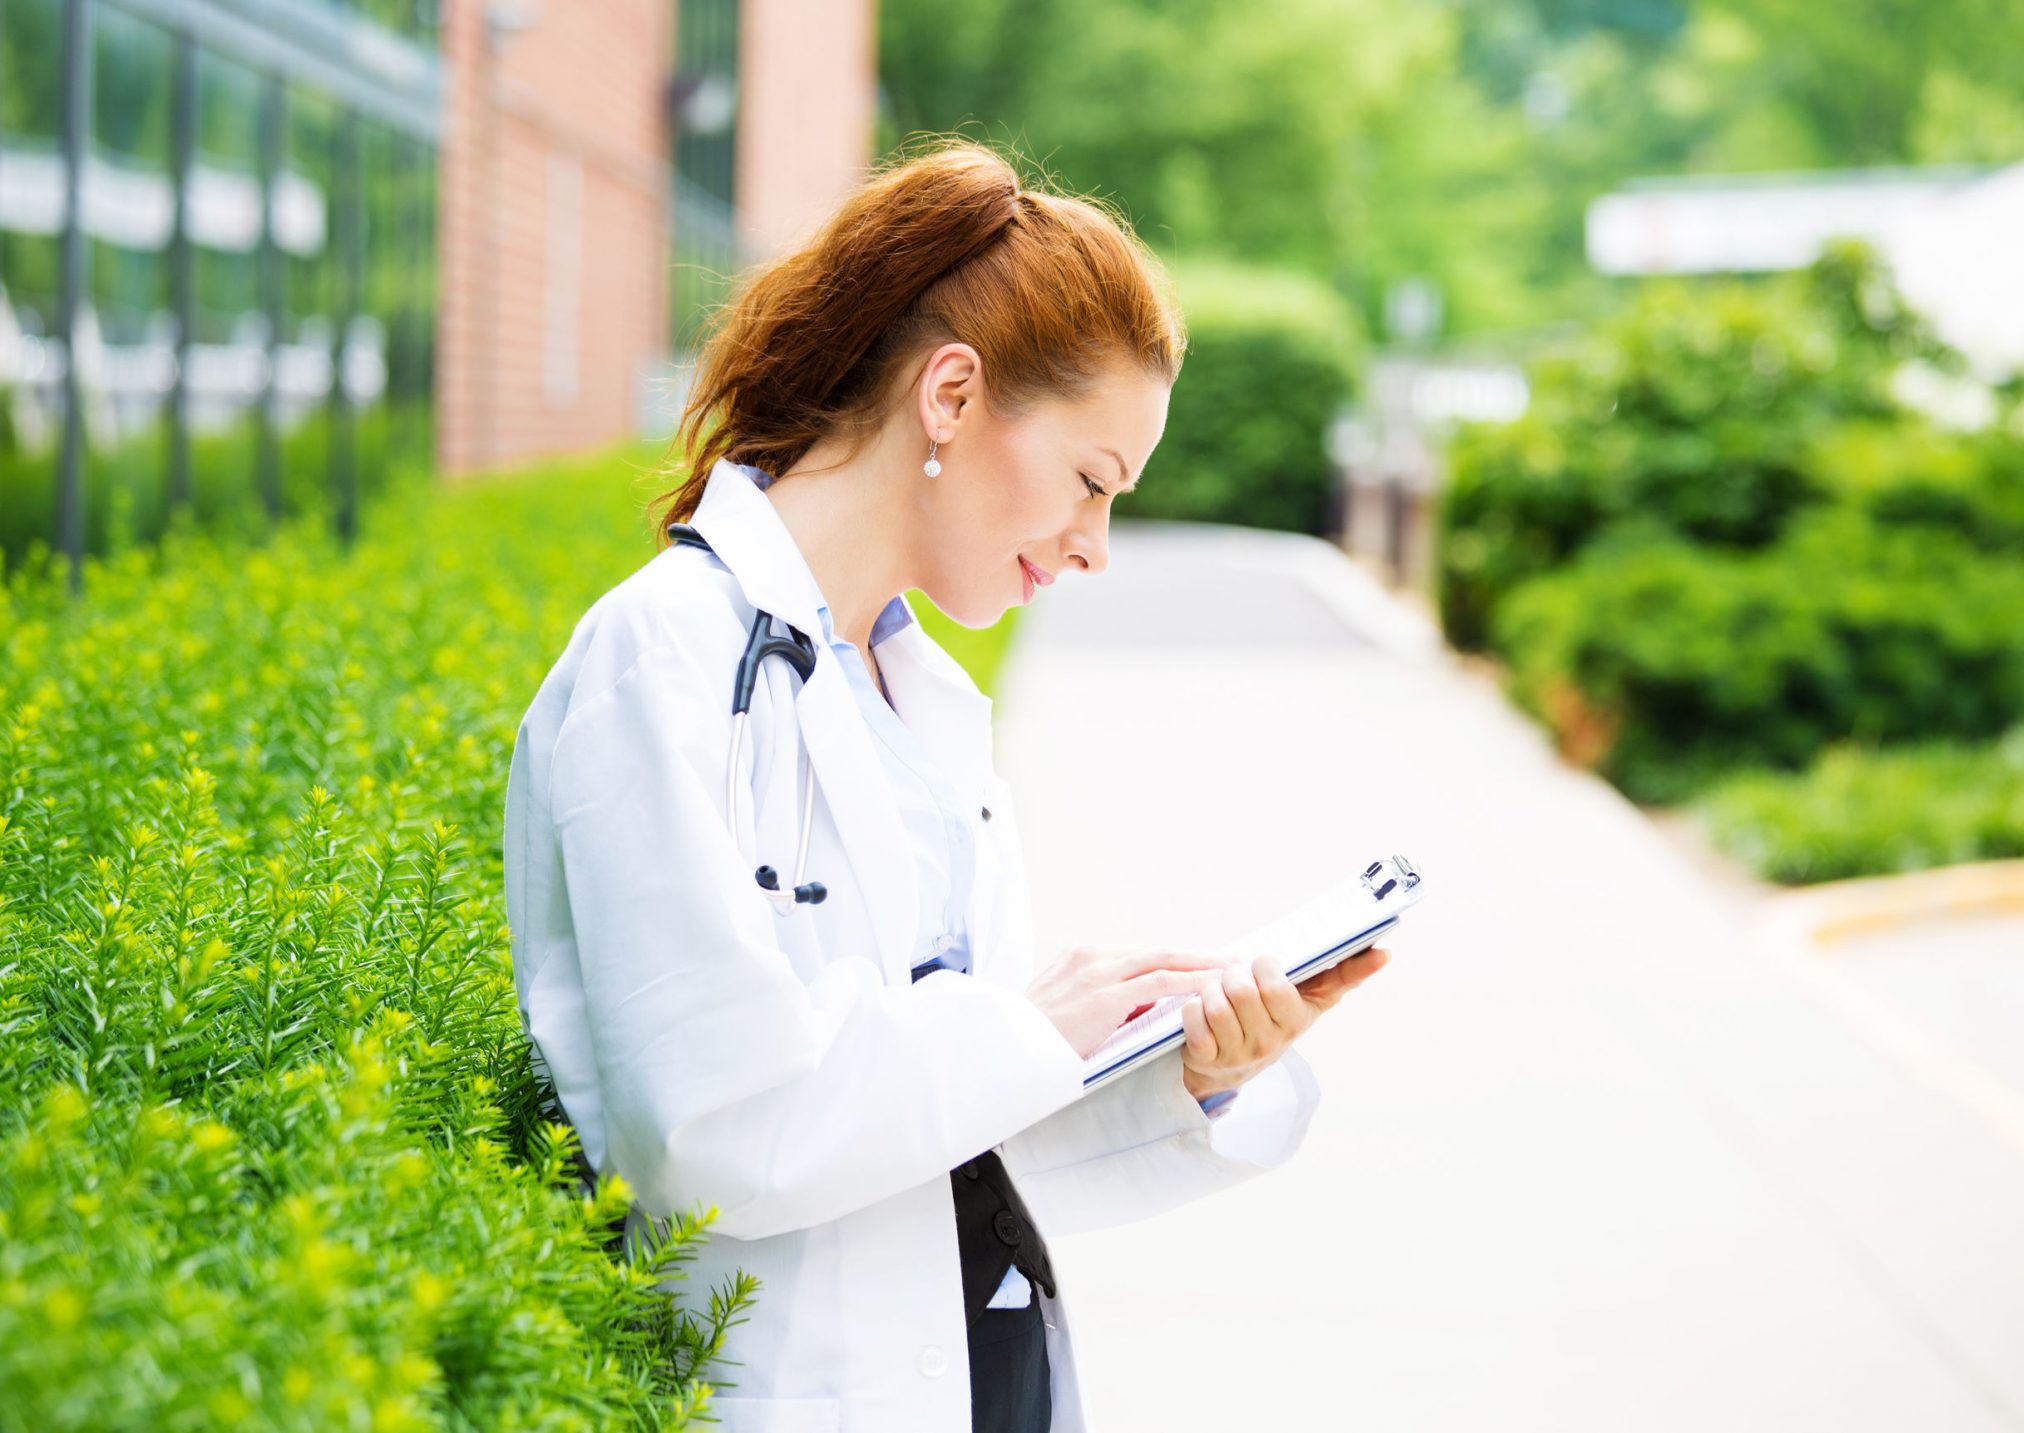 healthcare professional reading patient chart isolated outside hospital, green trees